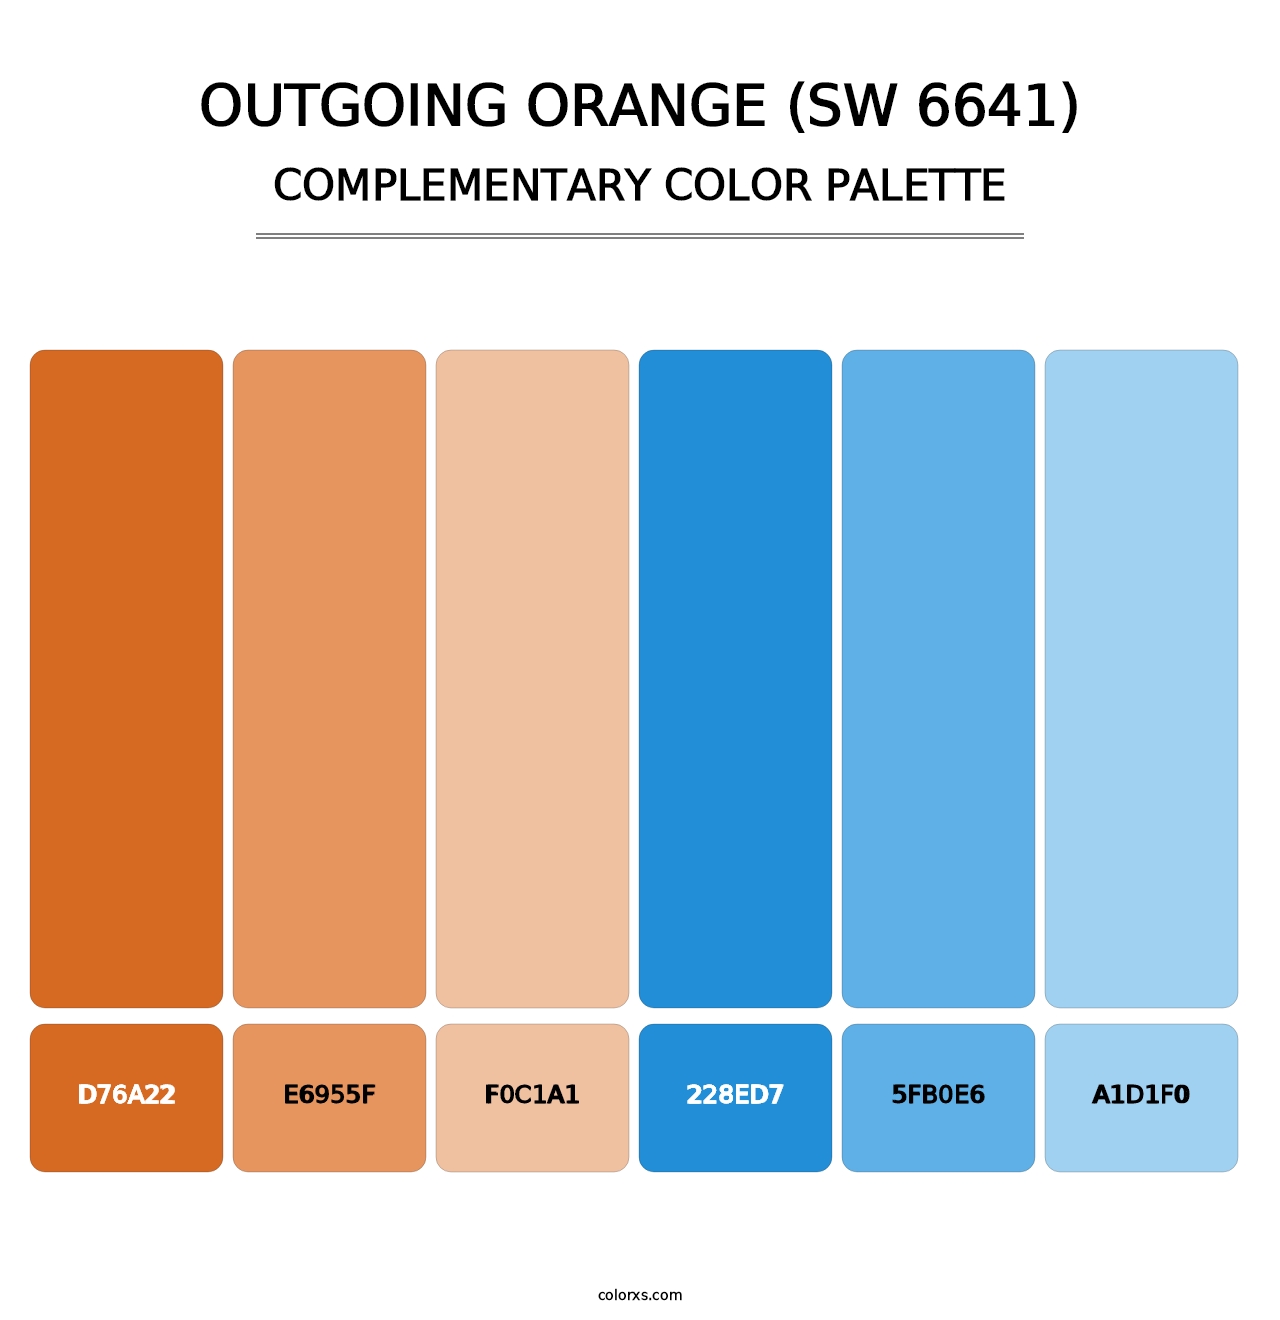 Outgoing Orange (SW 6641) - Complementary Color Palette